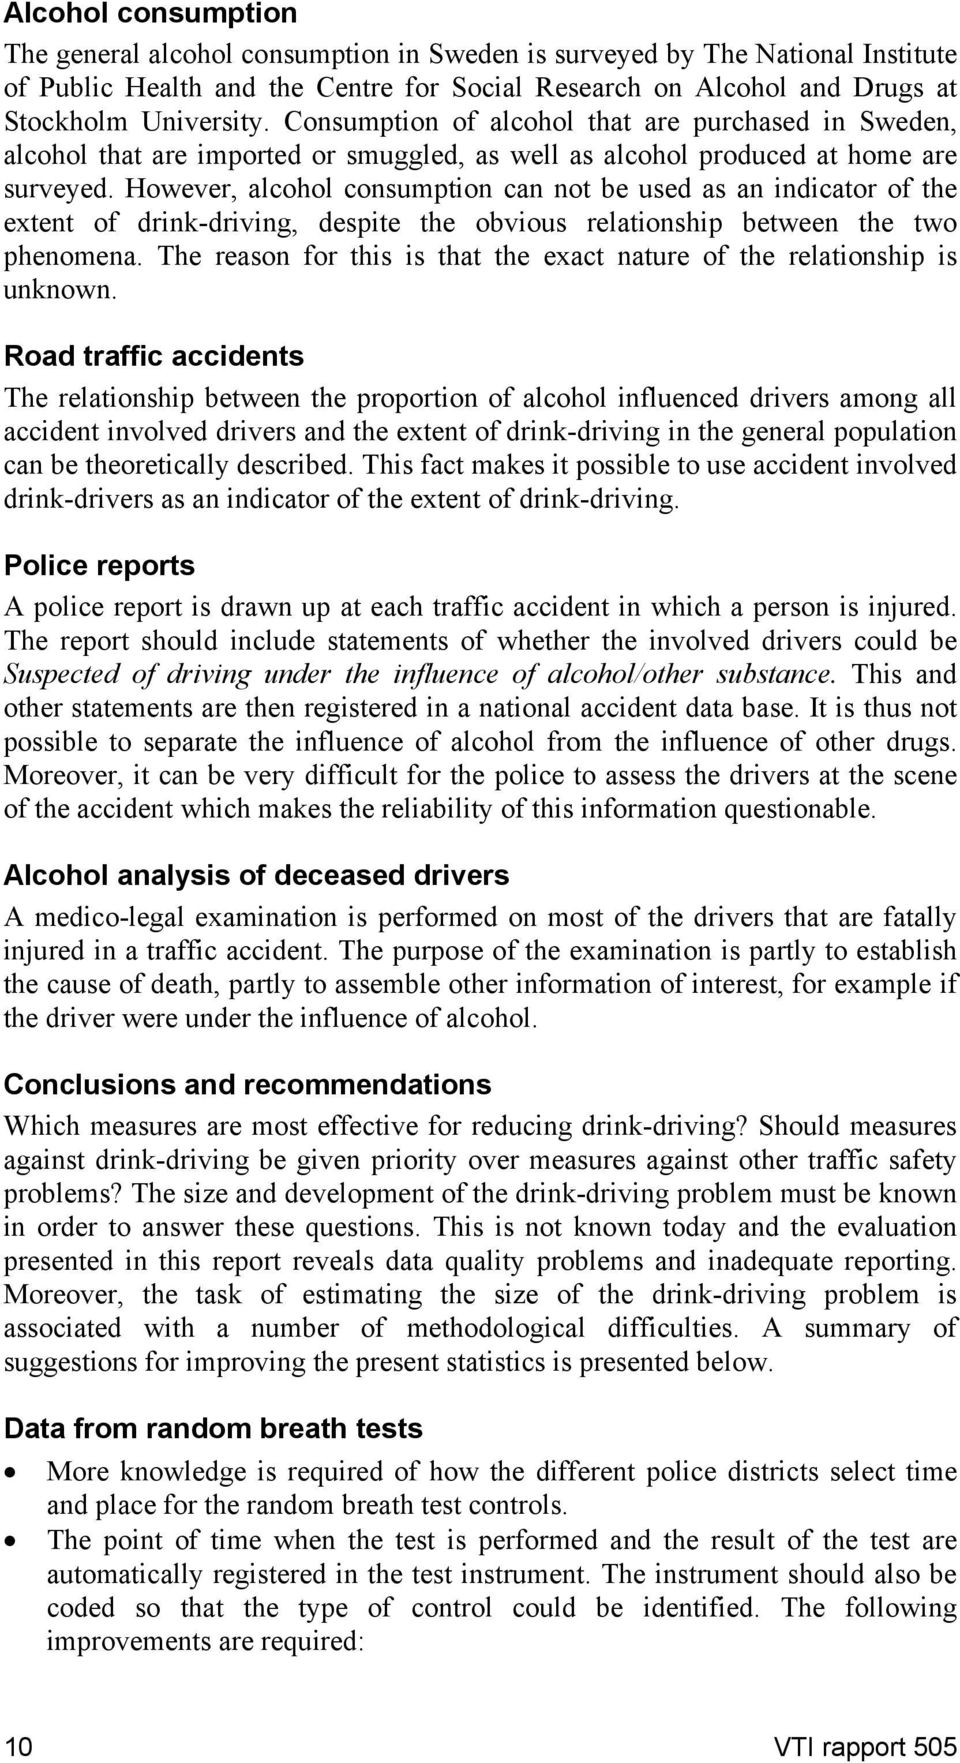 However, alcohol consumption can not be used as an indicator of the extent of drink-driving, despite the obvious relationship between the two phenomena.